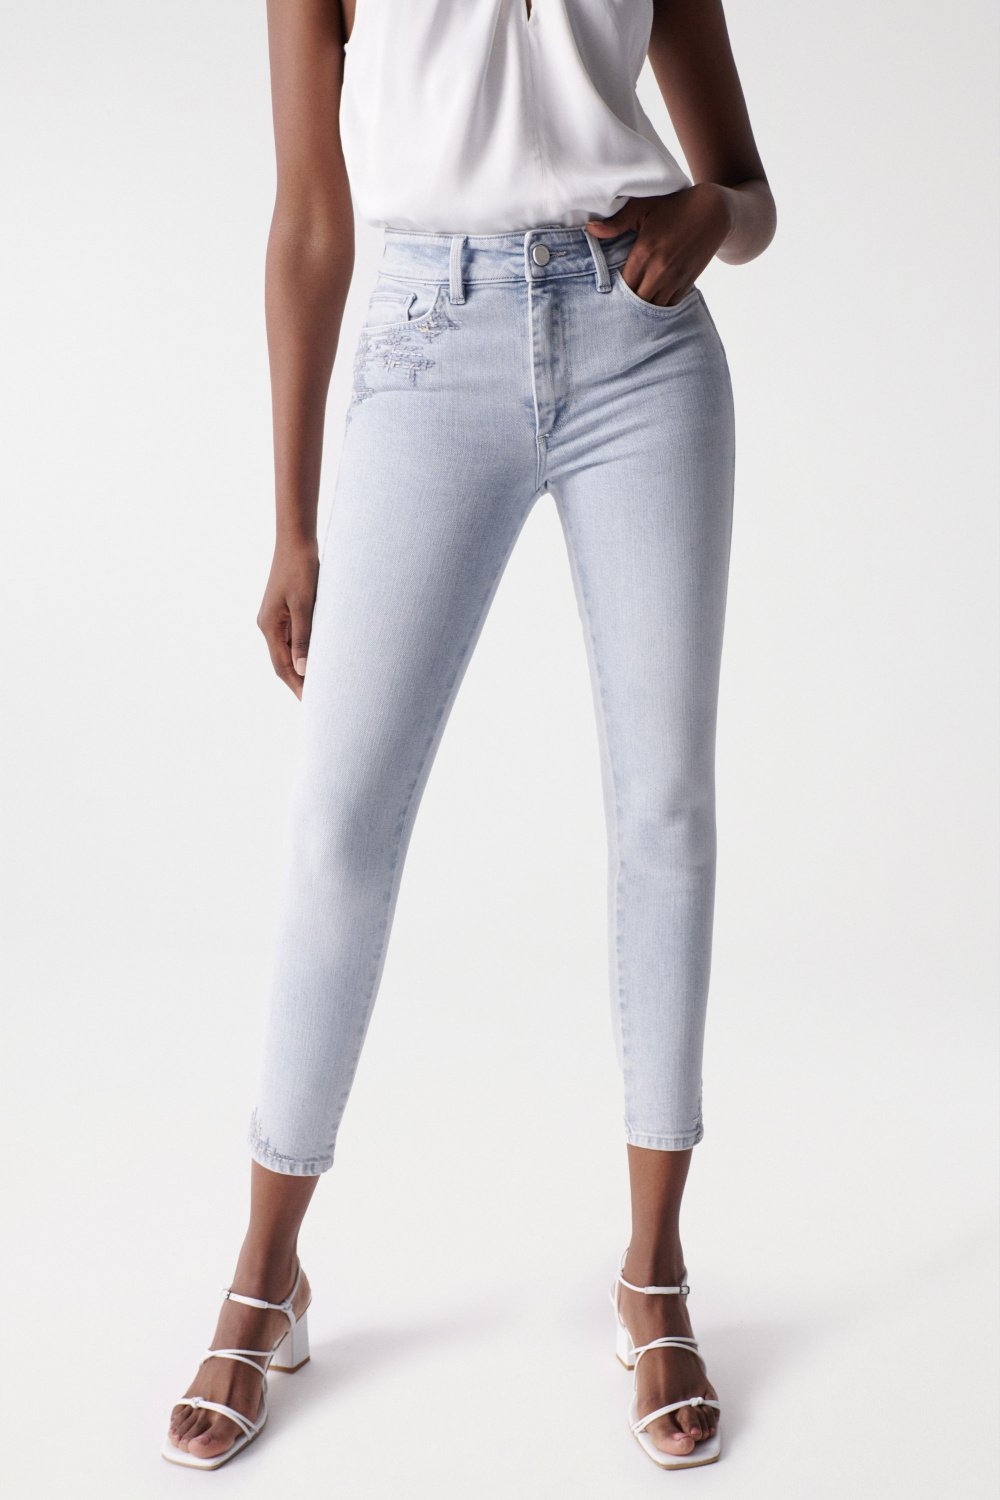 EMBROIDERED DESTINY PUSH UP JEANS - Salsa